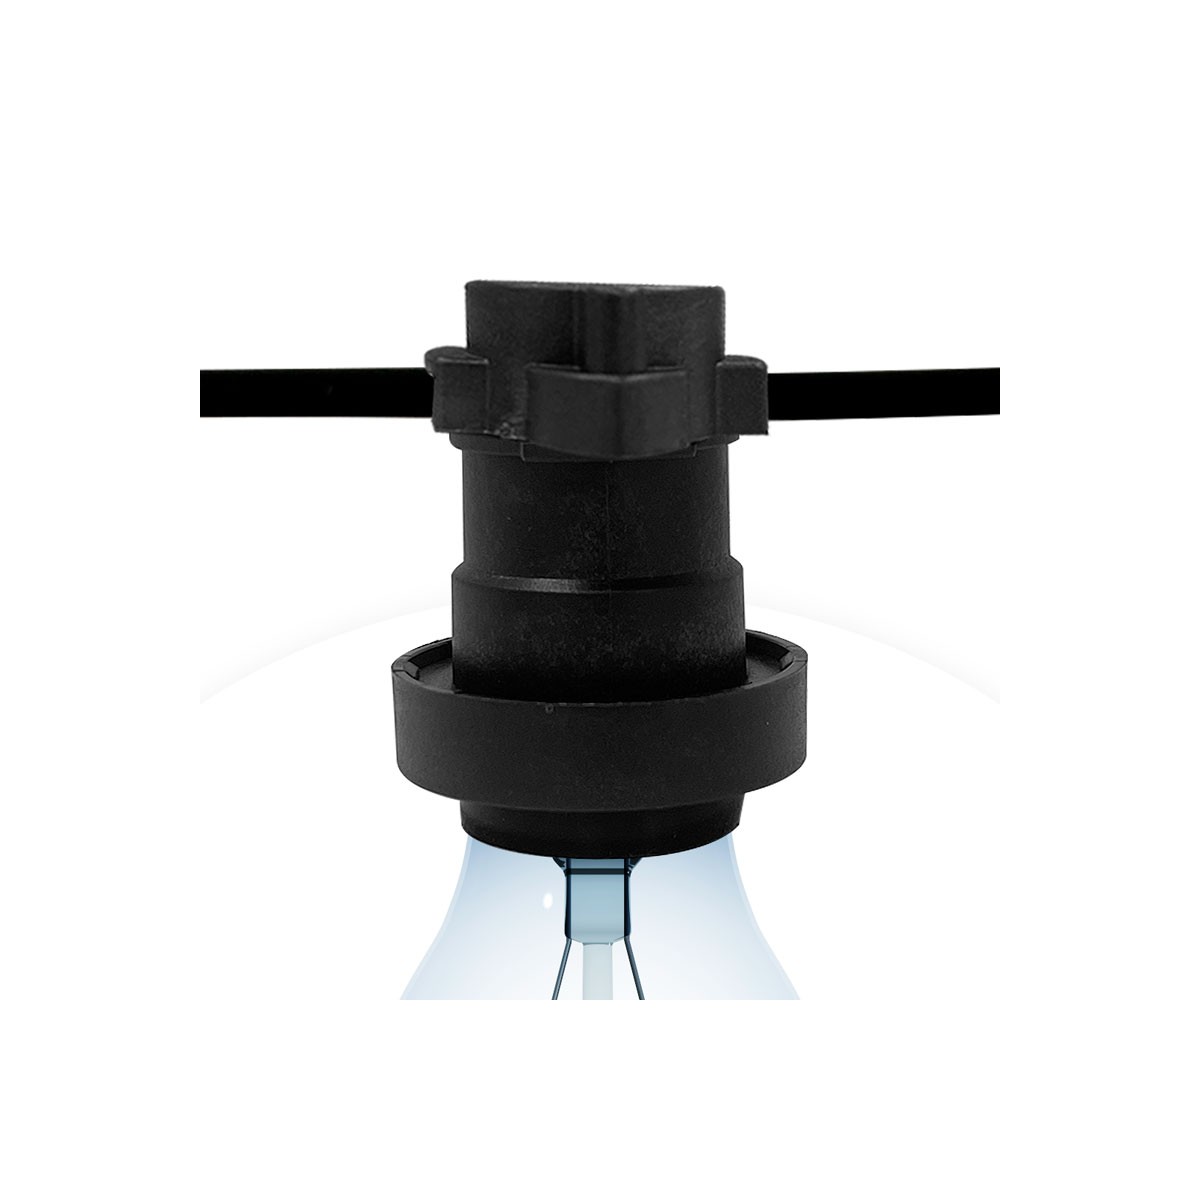 E27 Lampholder for Flat Cable Wreath IP44